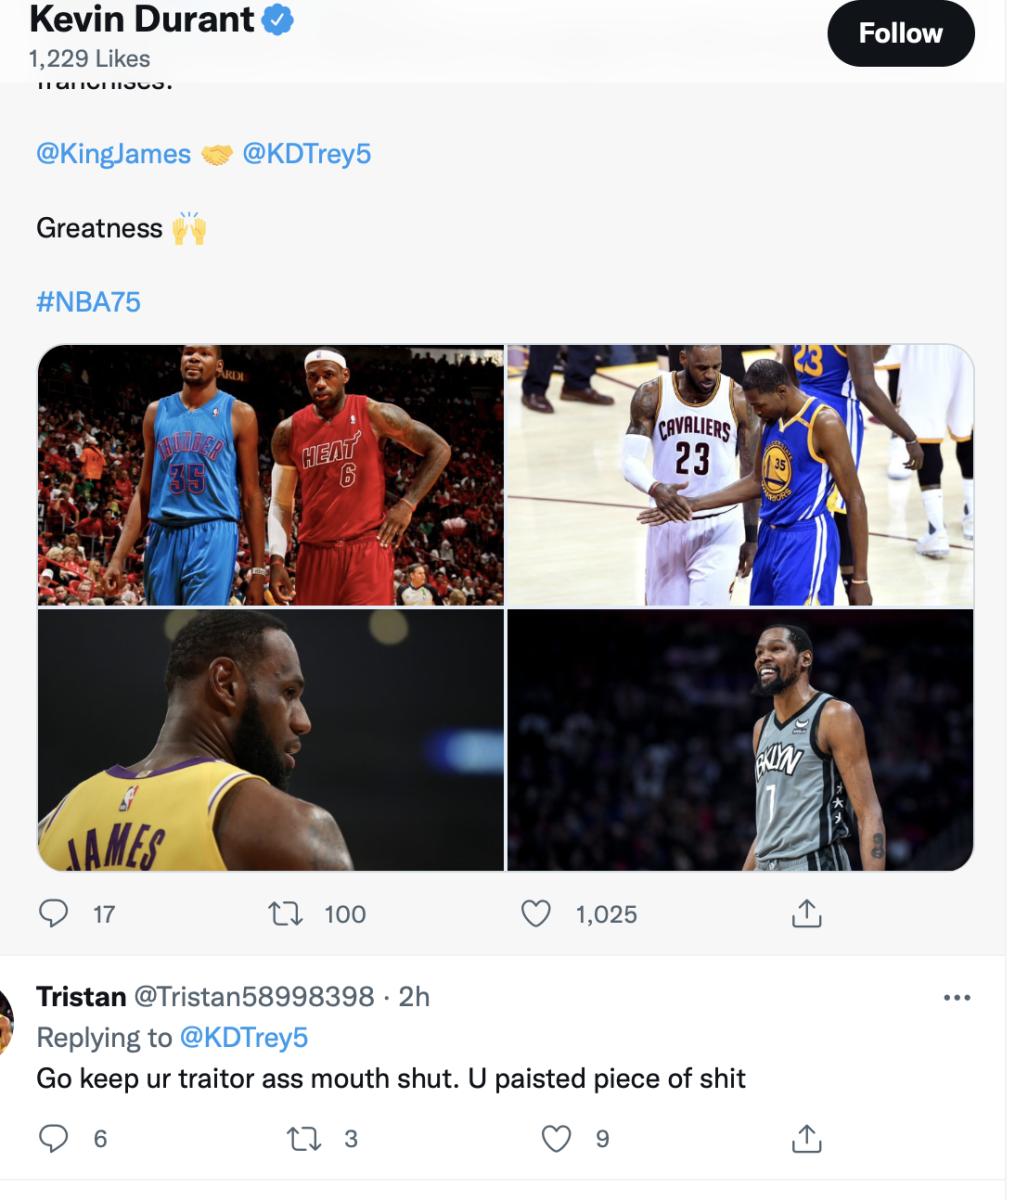 Screenshot of Kevin Durant's likes